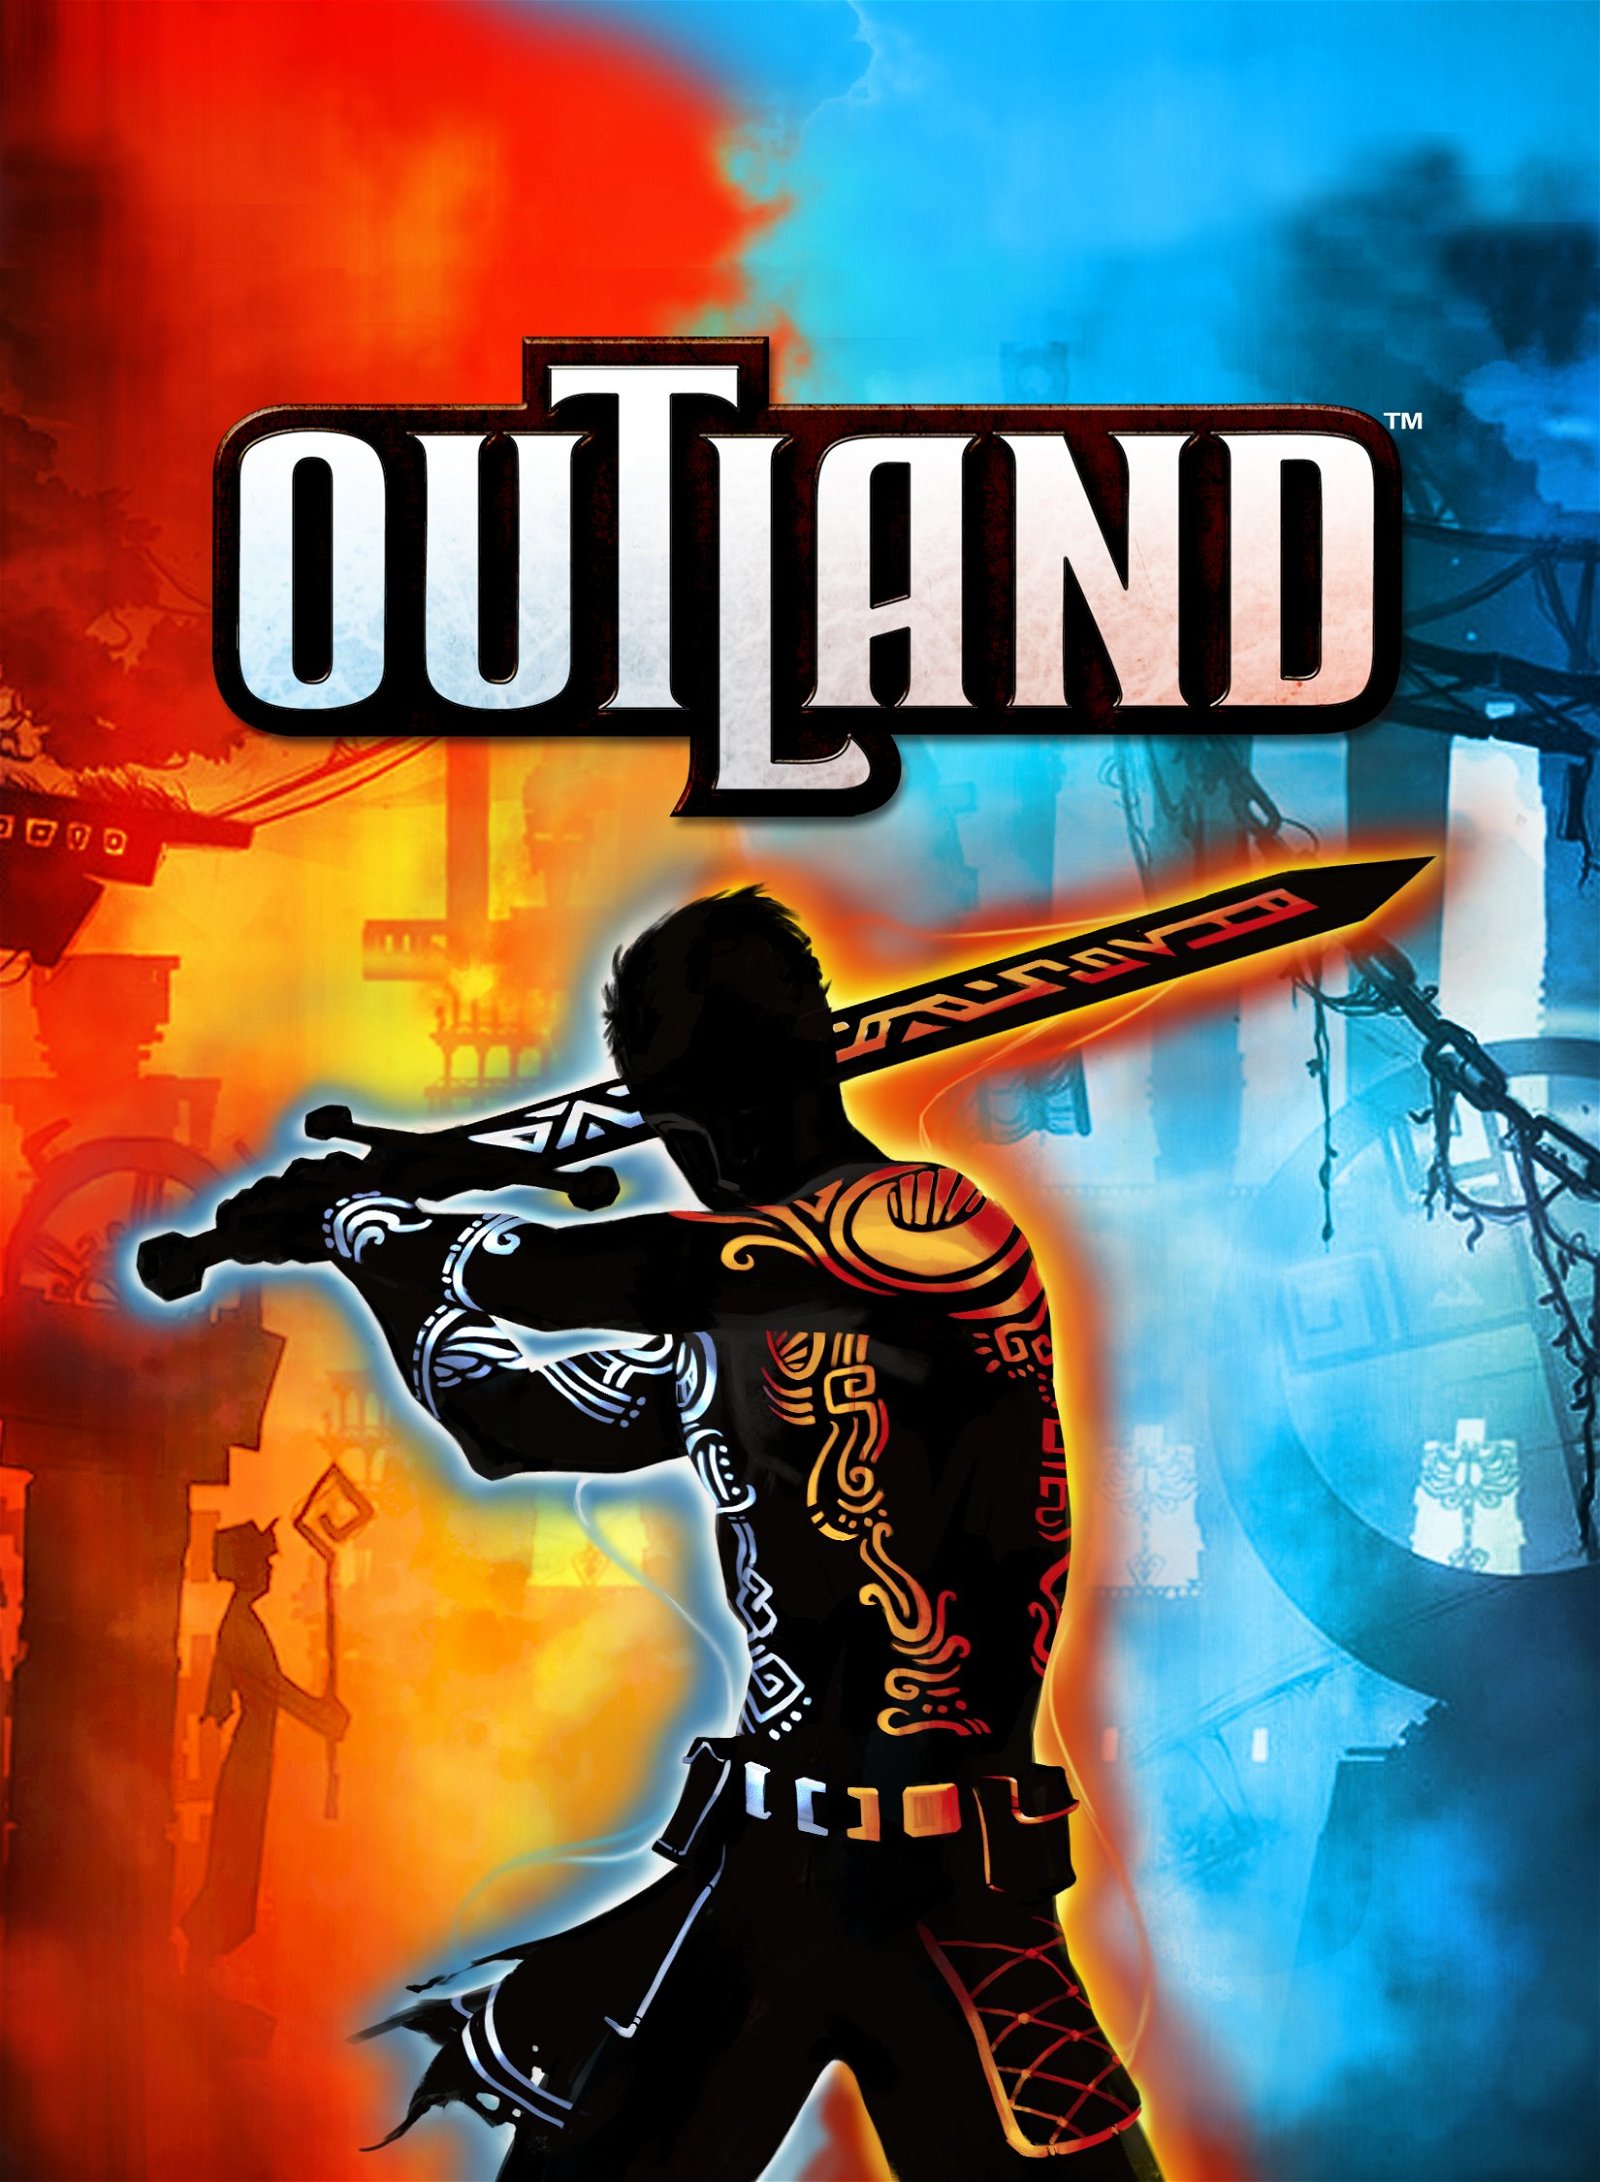 Image of Outland